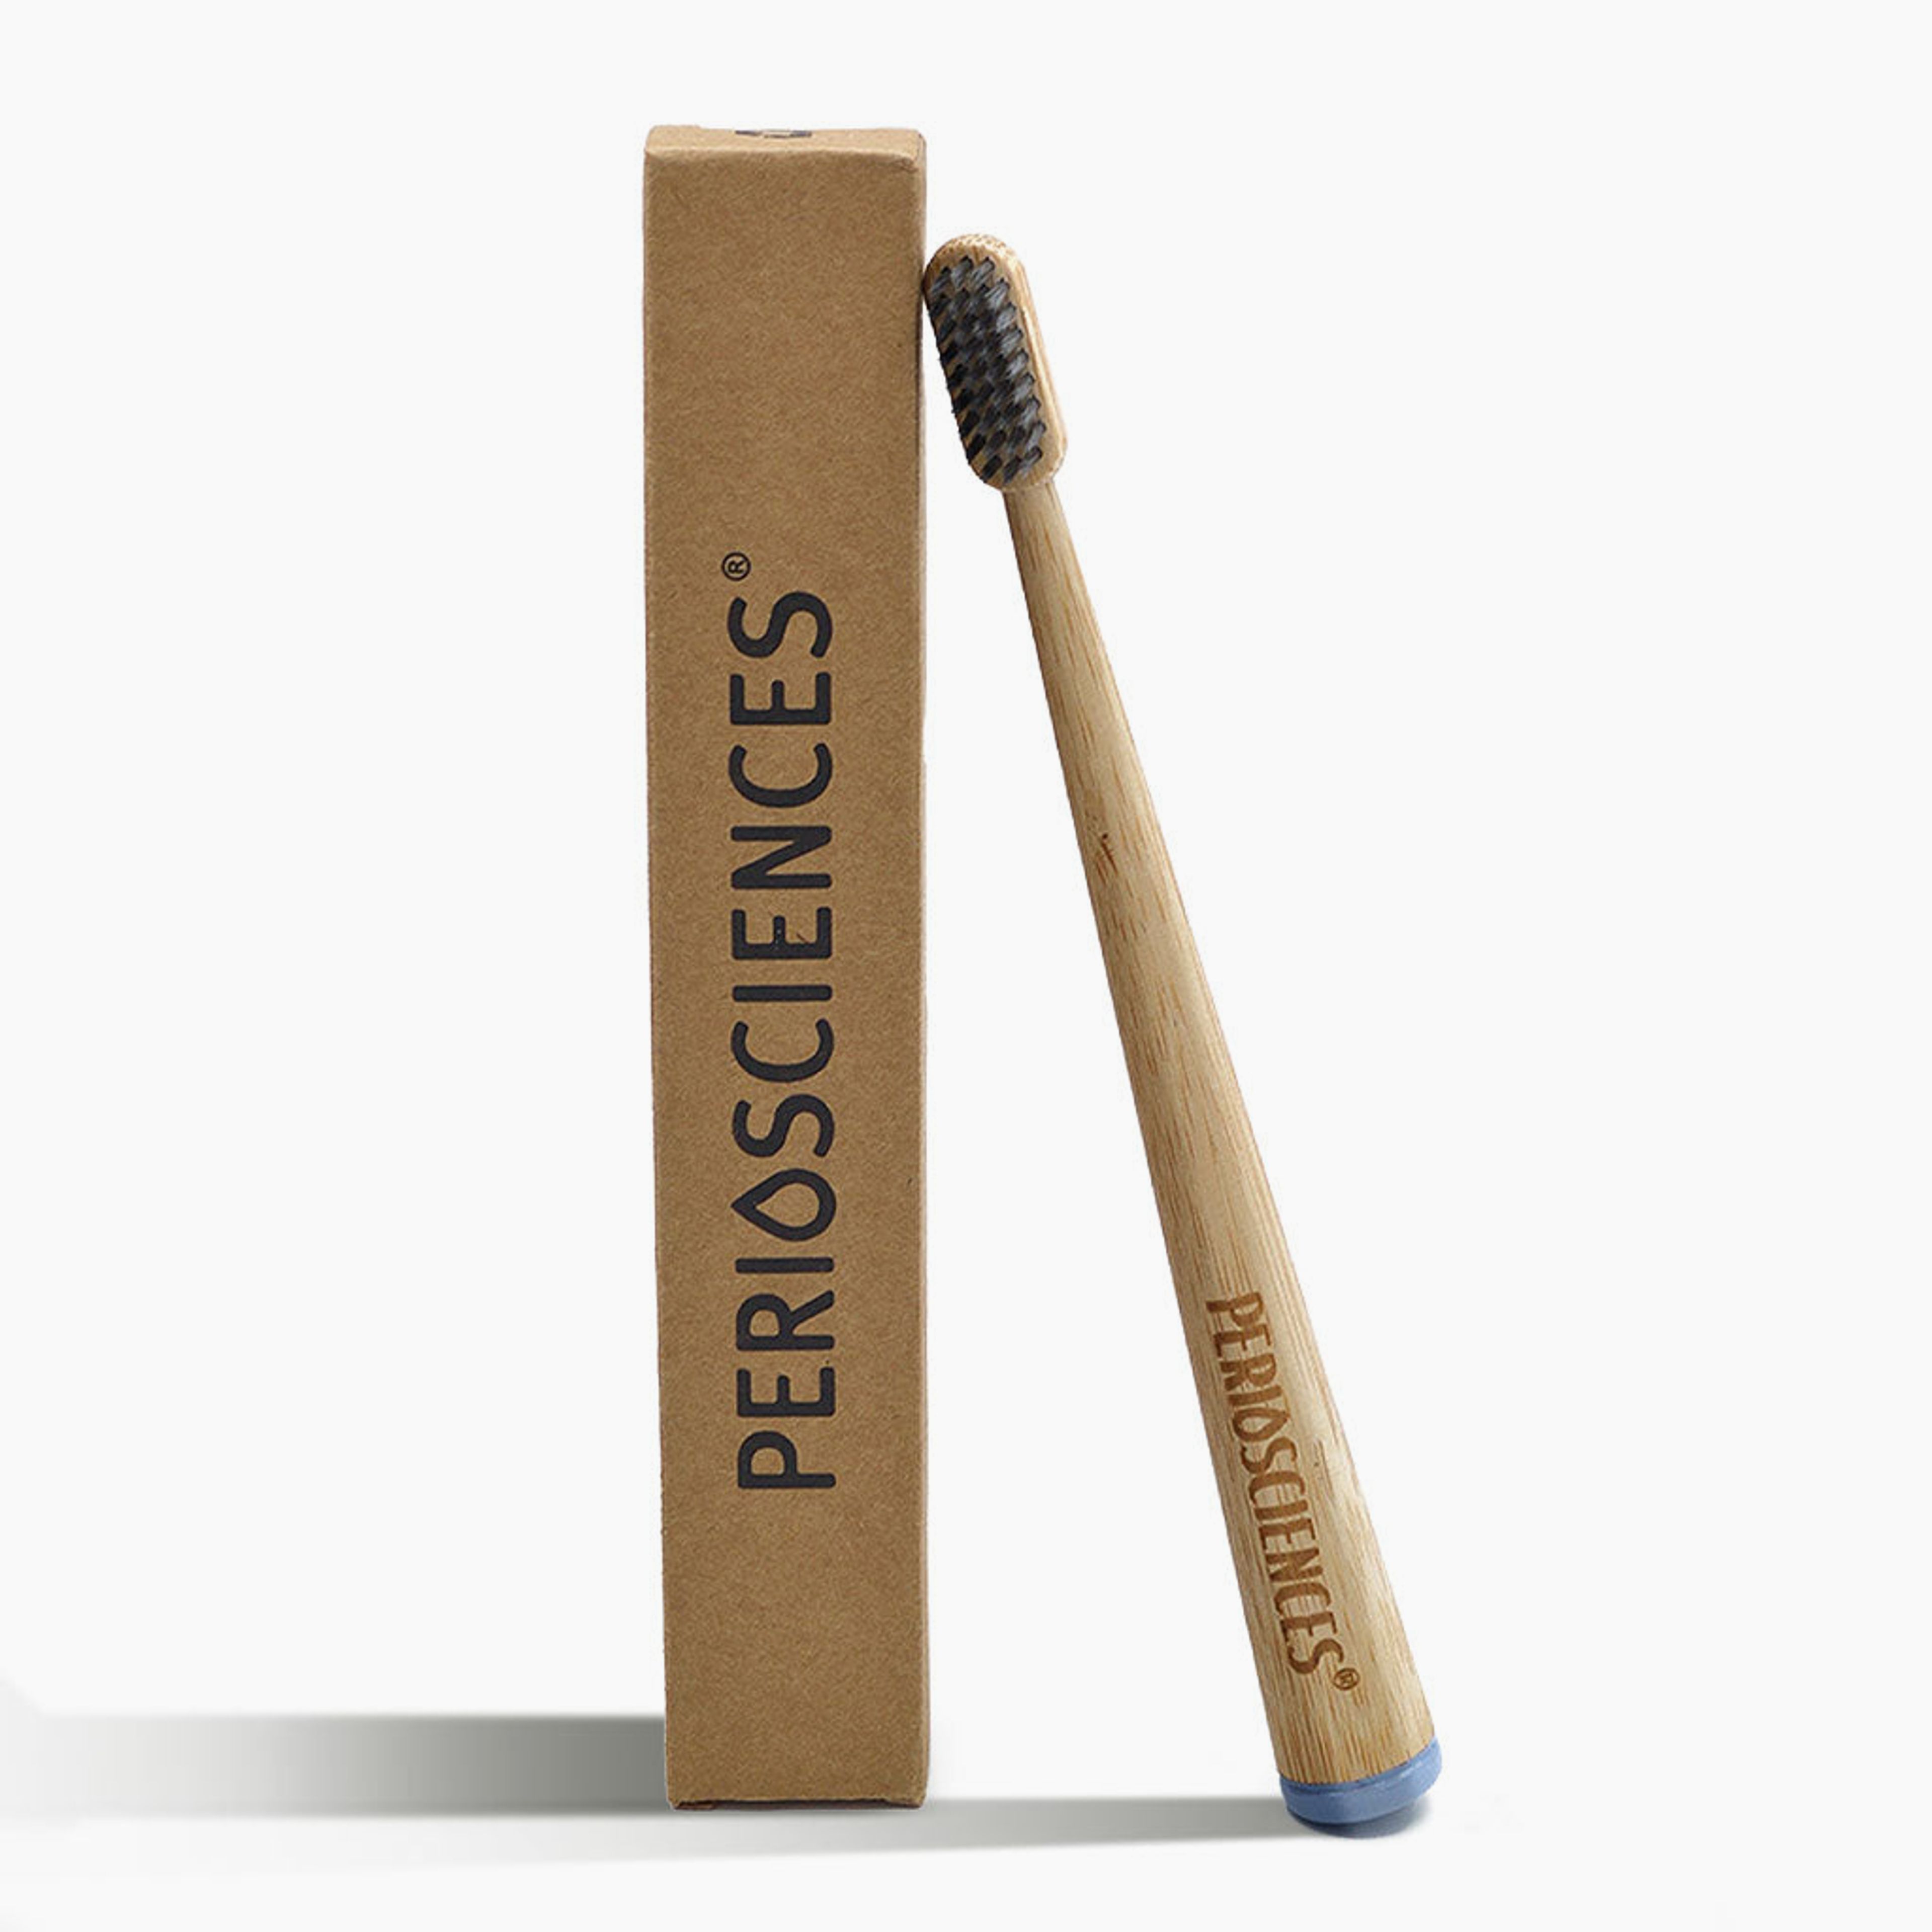 Post-Surgery Bamboo Charcoal Toothbrush